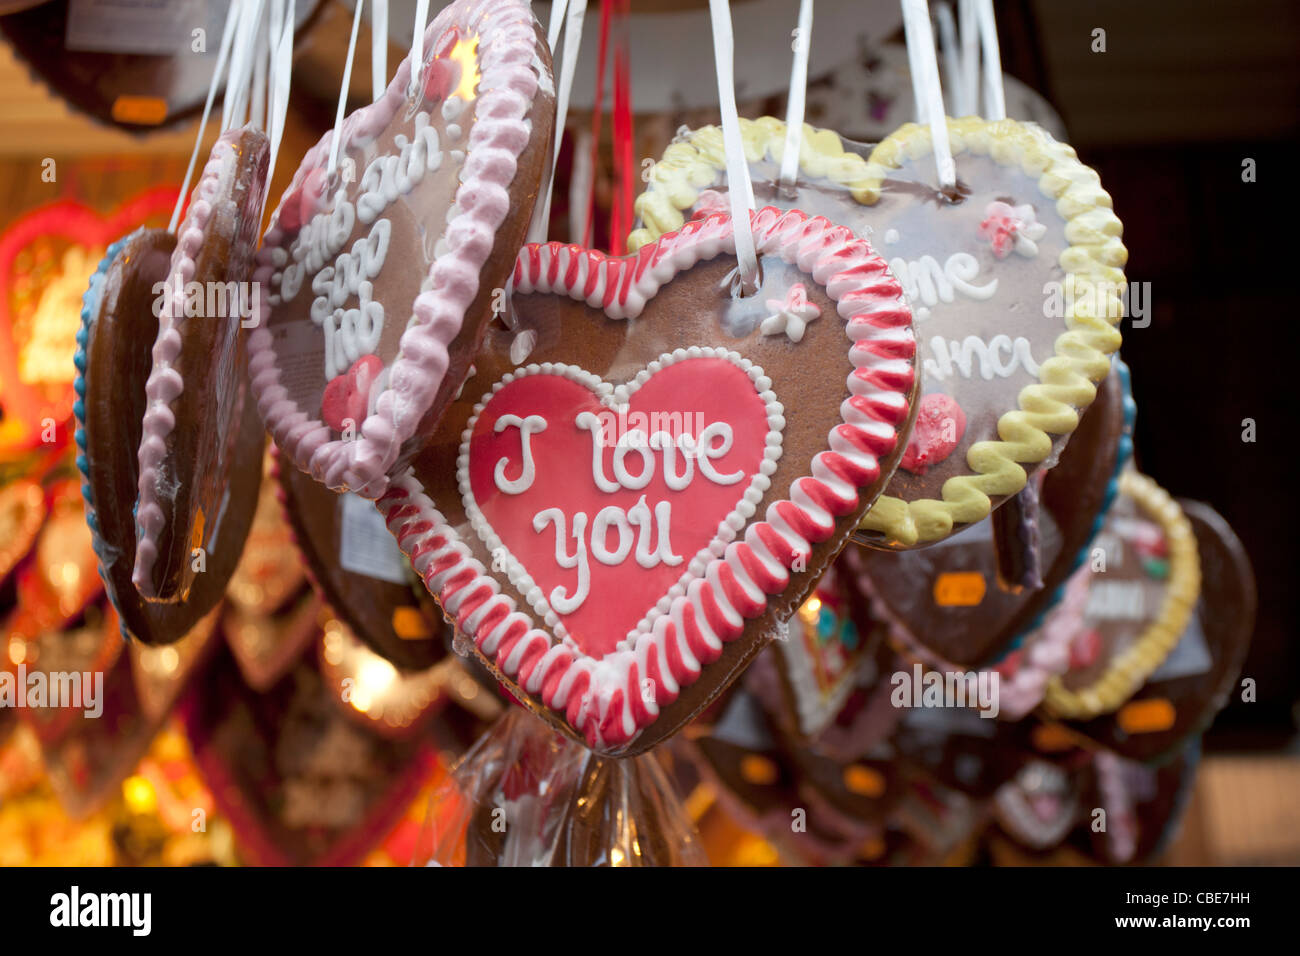 Heart-shaped cookies on sale at the Christmas Market, known locally as the Christkindlmarkt, in Vienna, Austria. Stock Photo